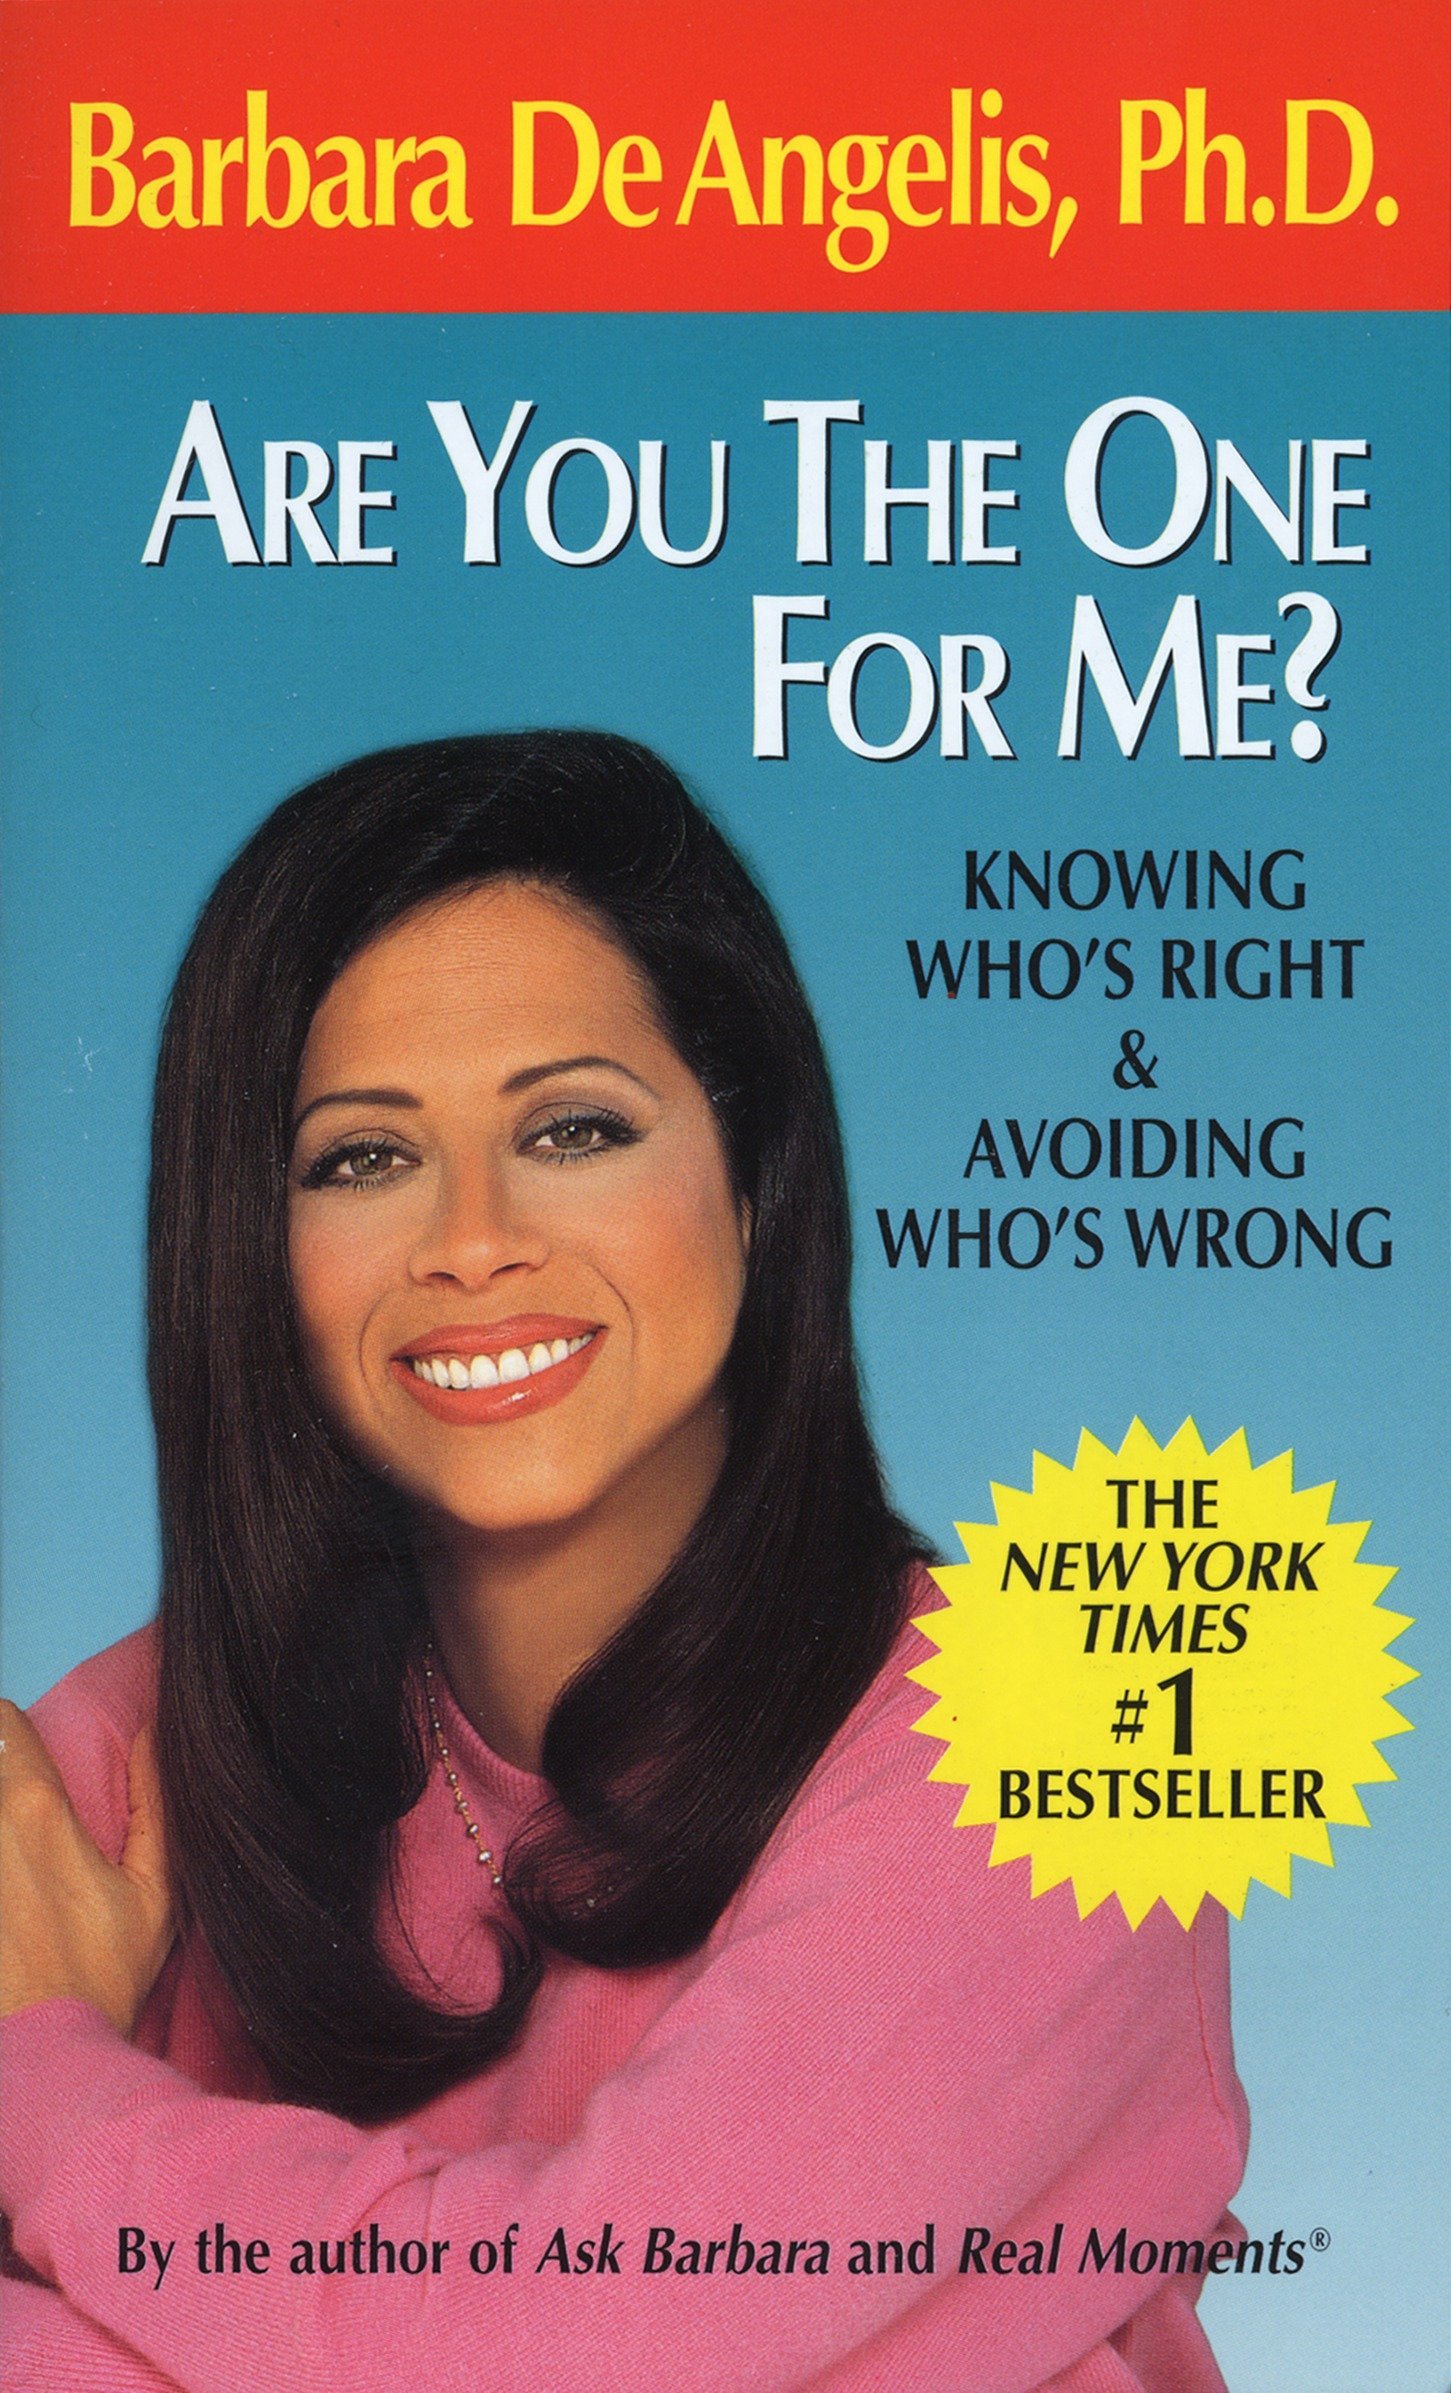 Are You the One For Me? Knowing who's right & avoiding who's wrong. By Barbara DeAngelis.